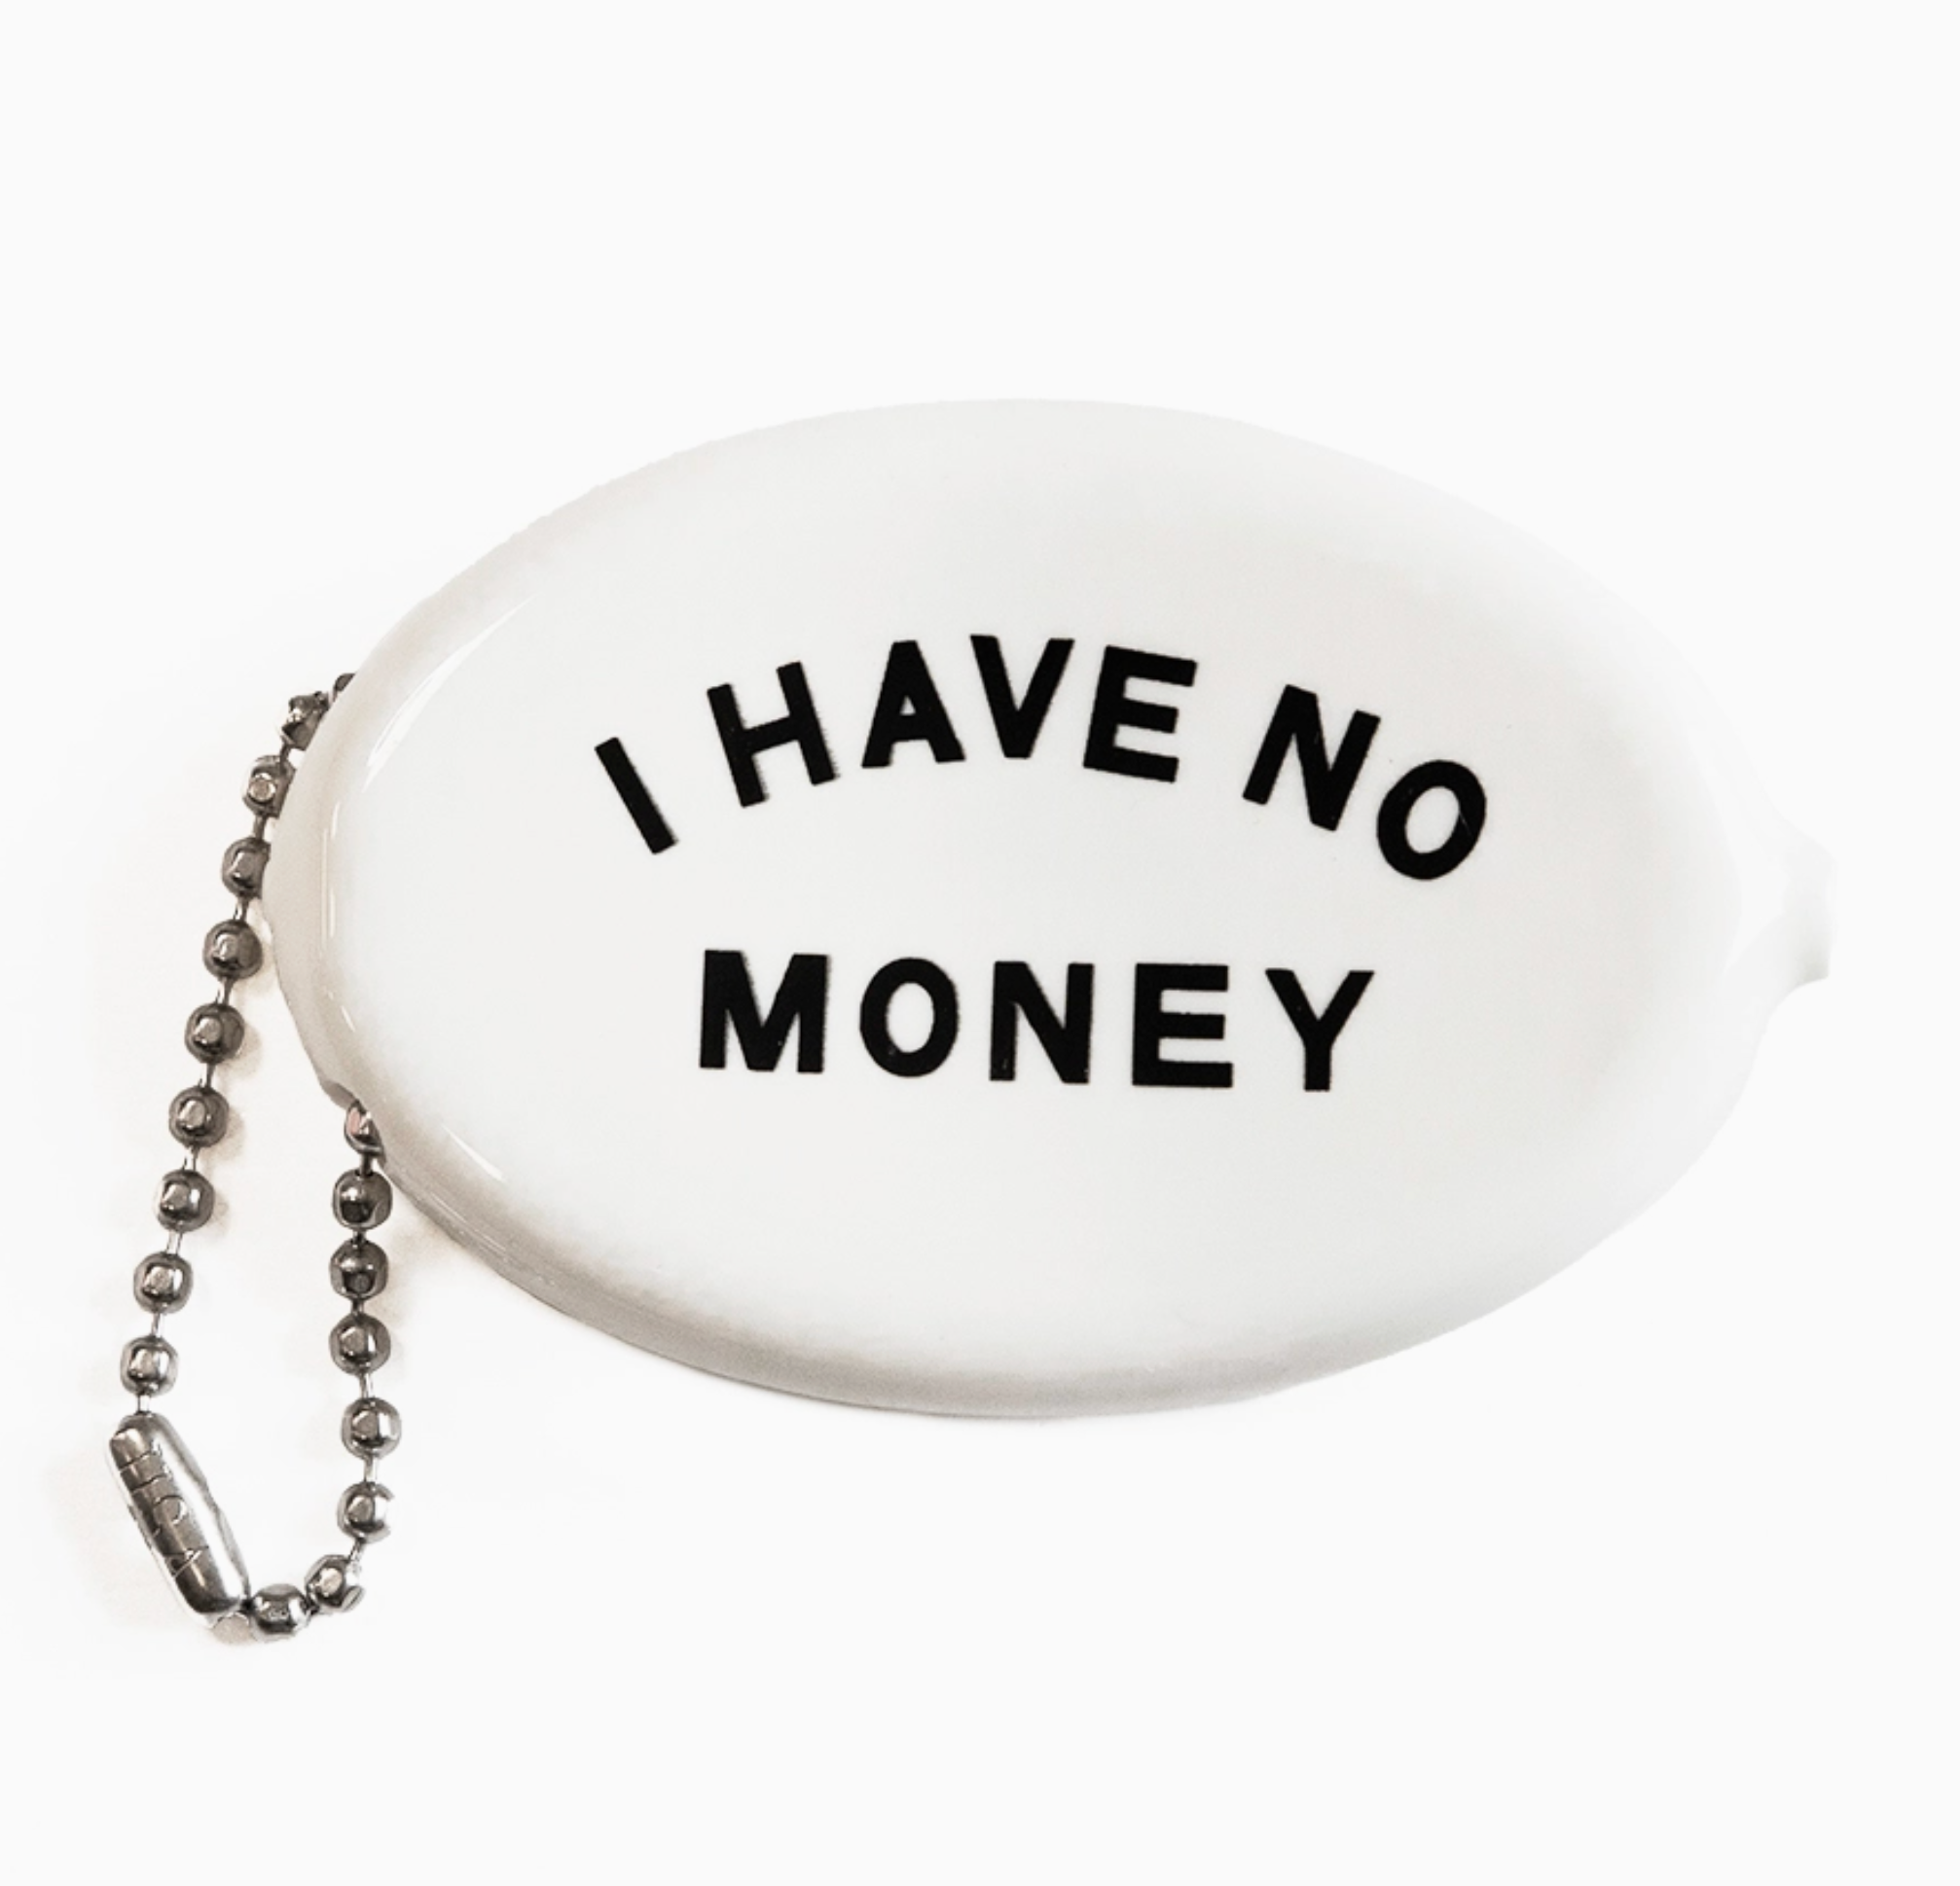 I Have No Money Vintage Rubber Coin Purse Pouch by Three Potato Four Sold by Le Monkey House